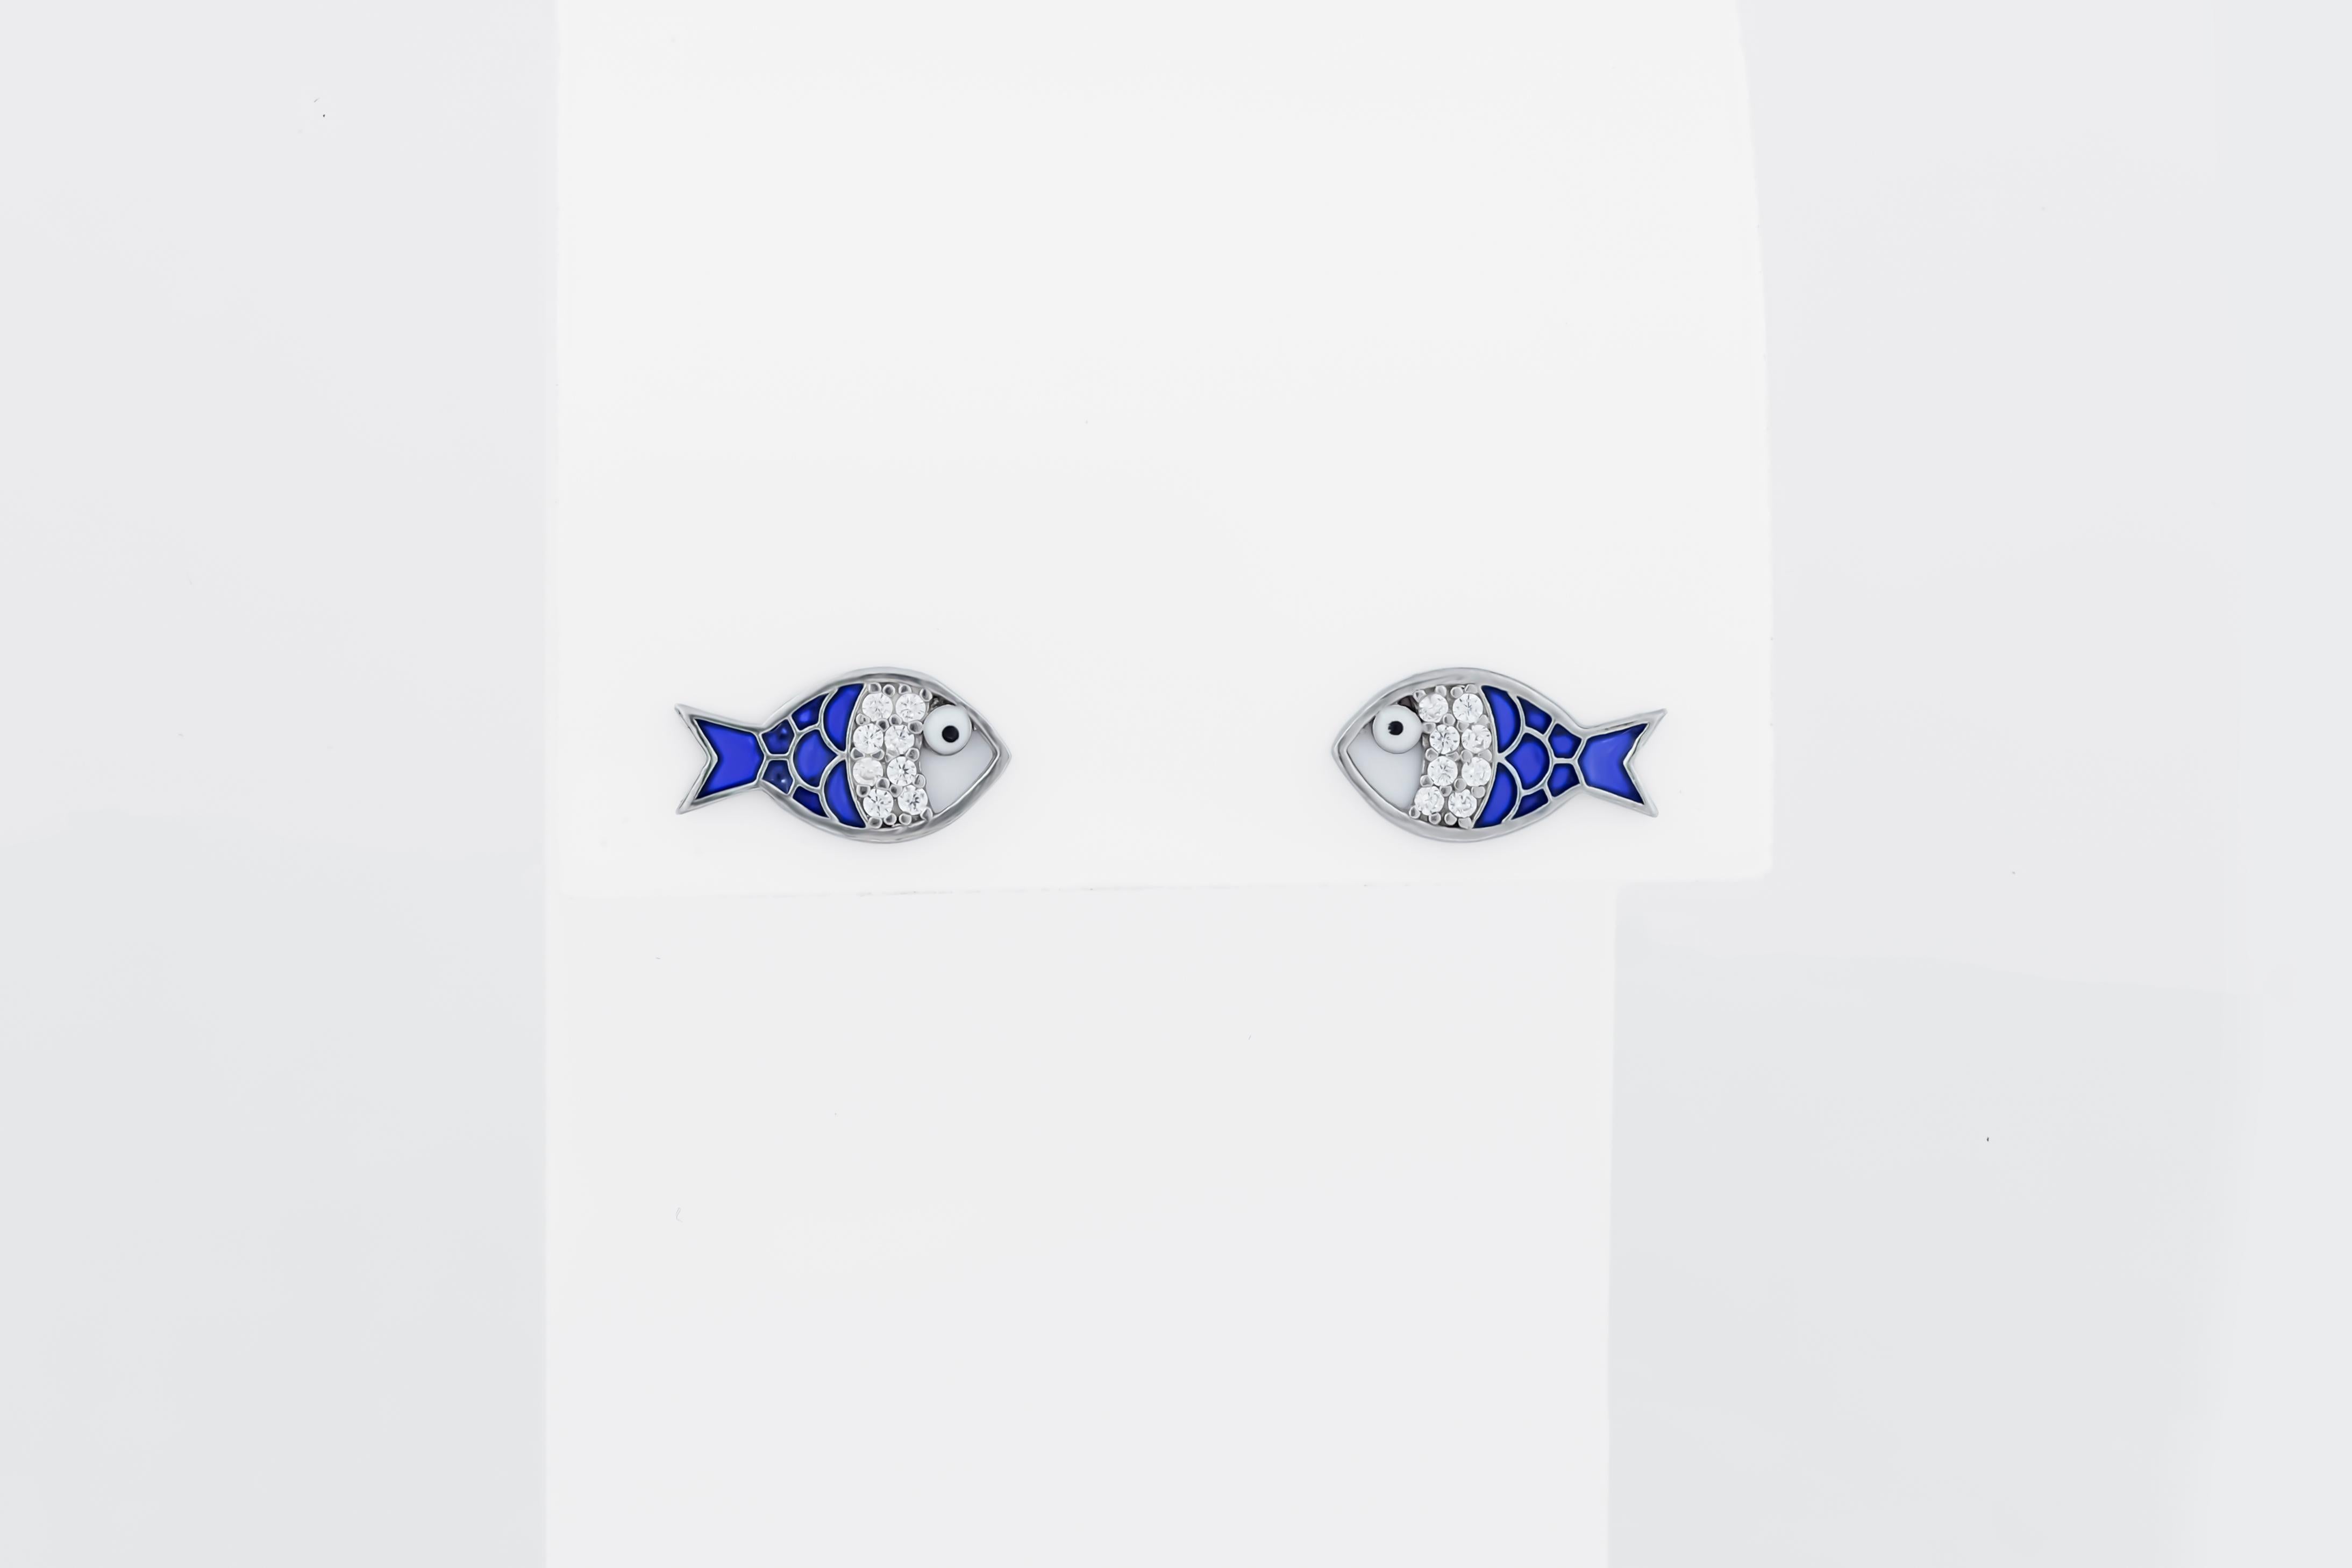 Round Cut Fish earrings with moissanites and blue enamel in 14k gold. For Sale